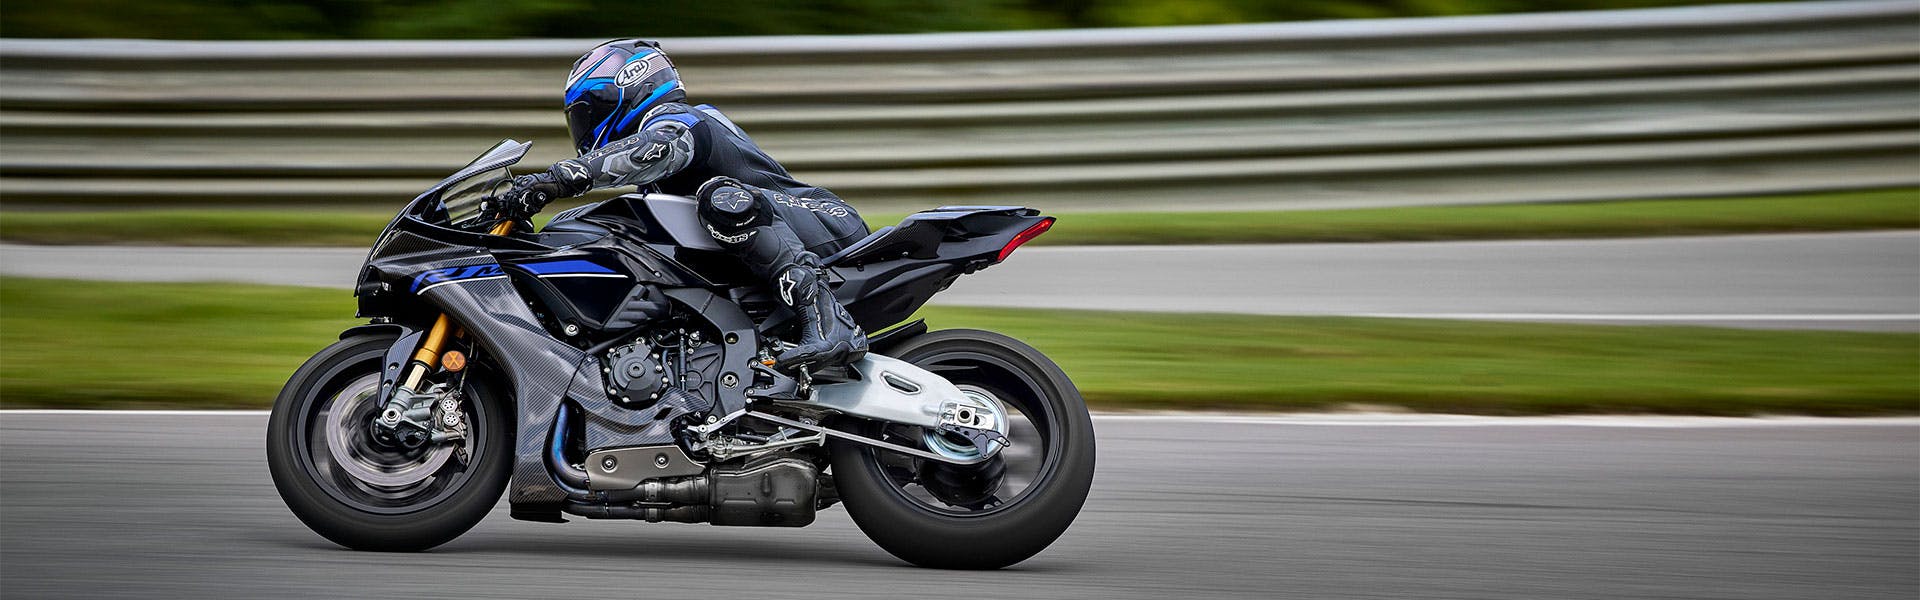 Yamaha YZF-R1M in Icon Performance colour in action on the road.